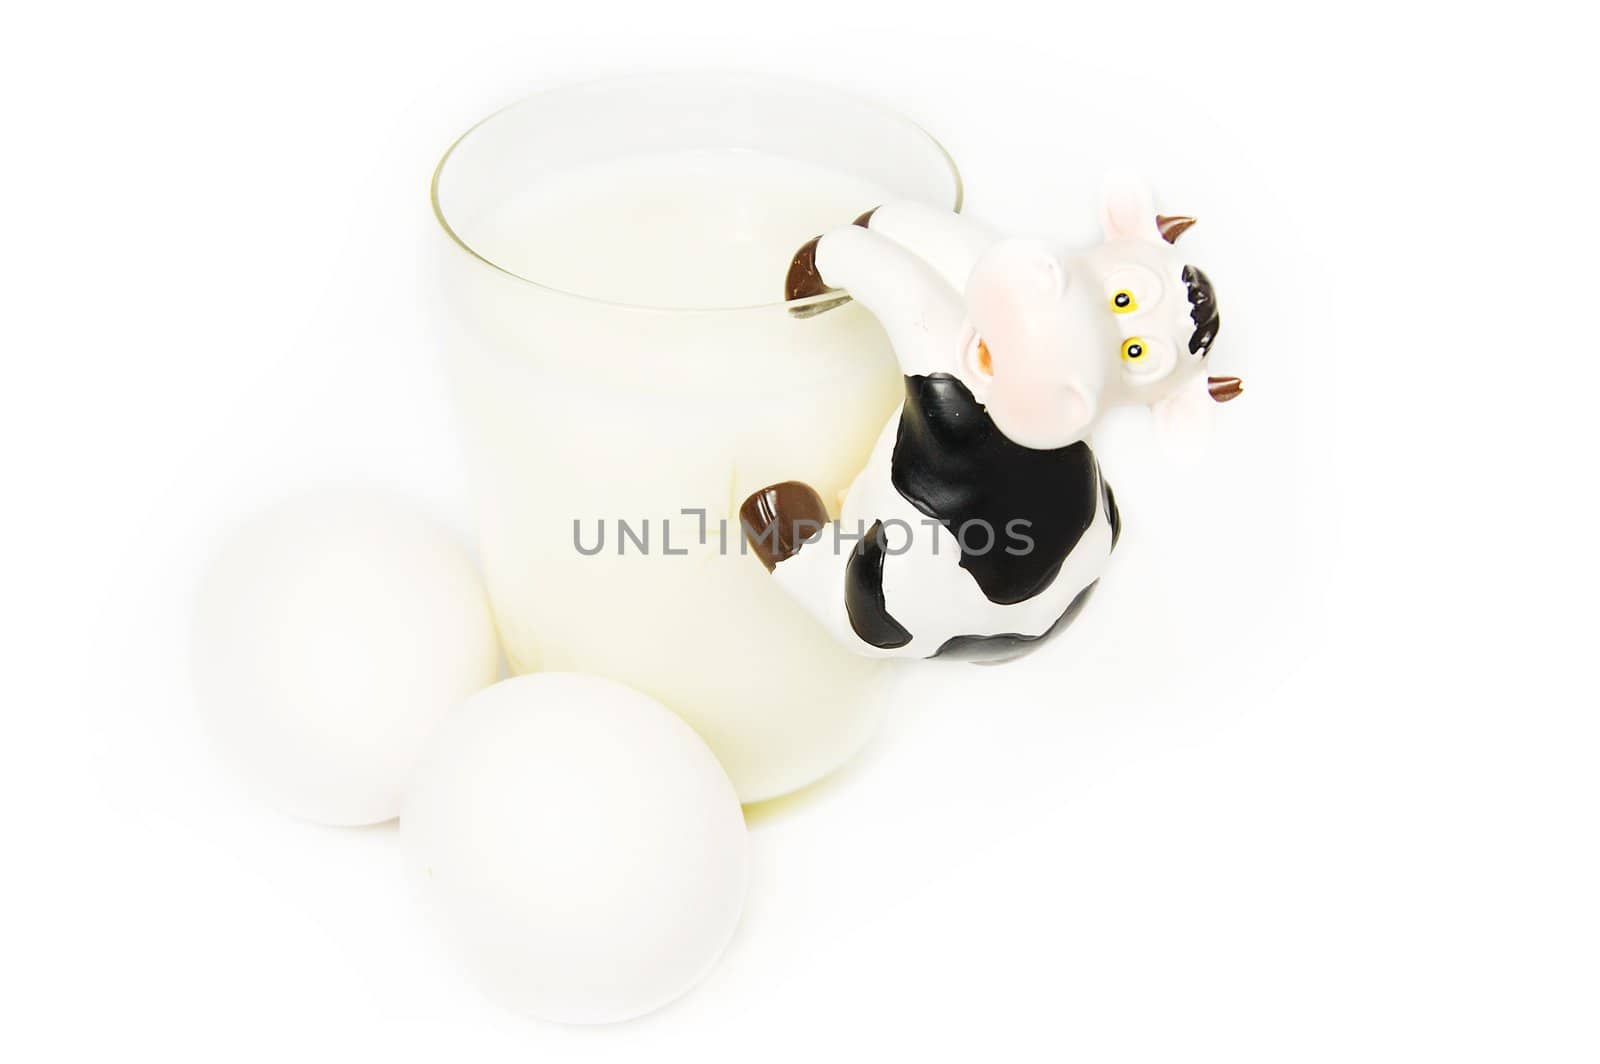 Glass of milk, eggs and toy cow on white